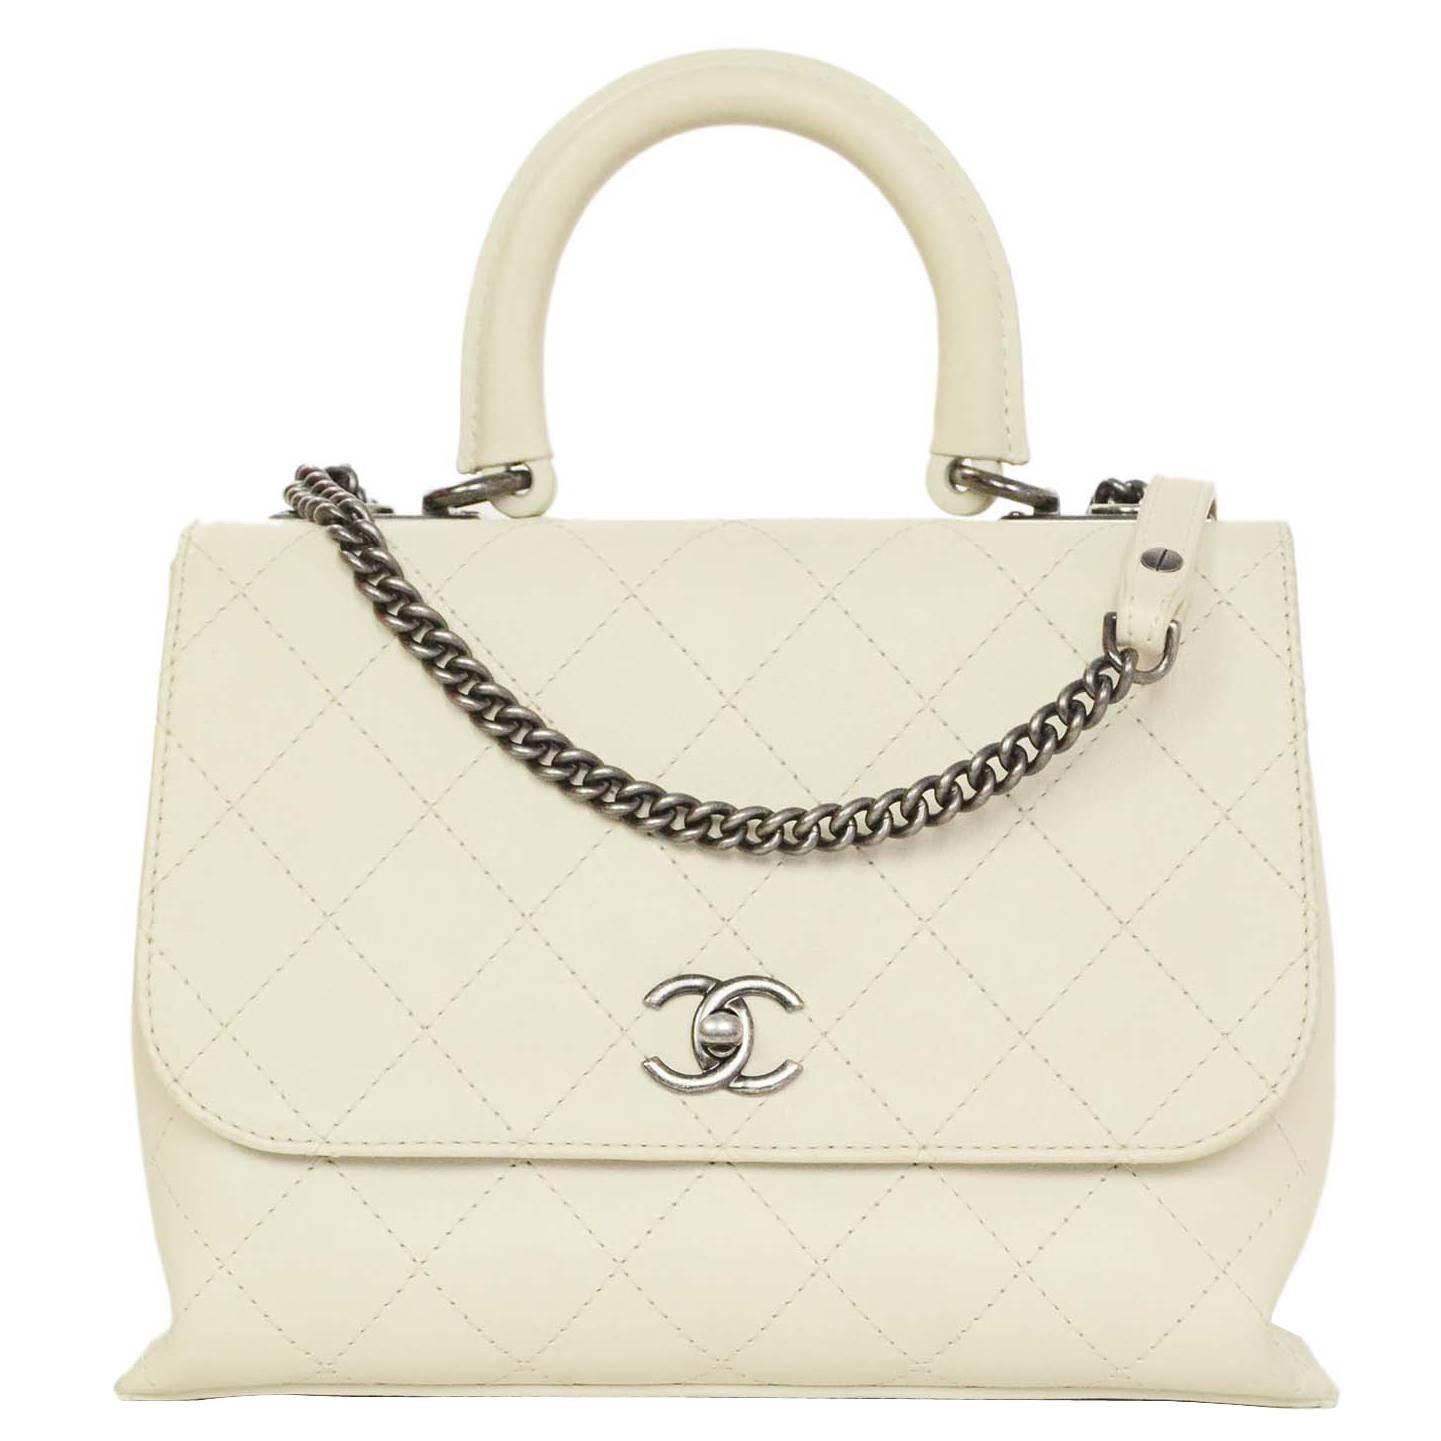 Chanel 2016 Ivory Quilted Urban Luxury Flap Bag SHW RT. $4, 800